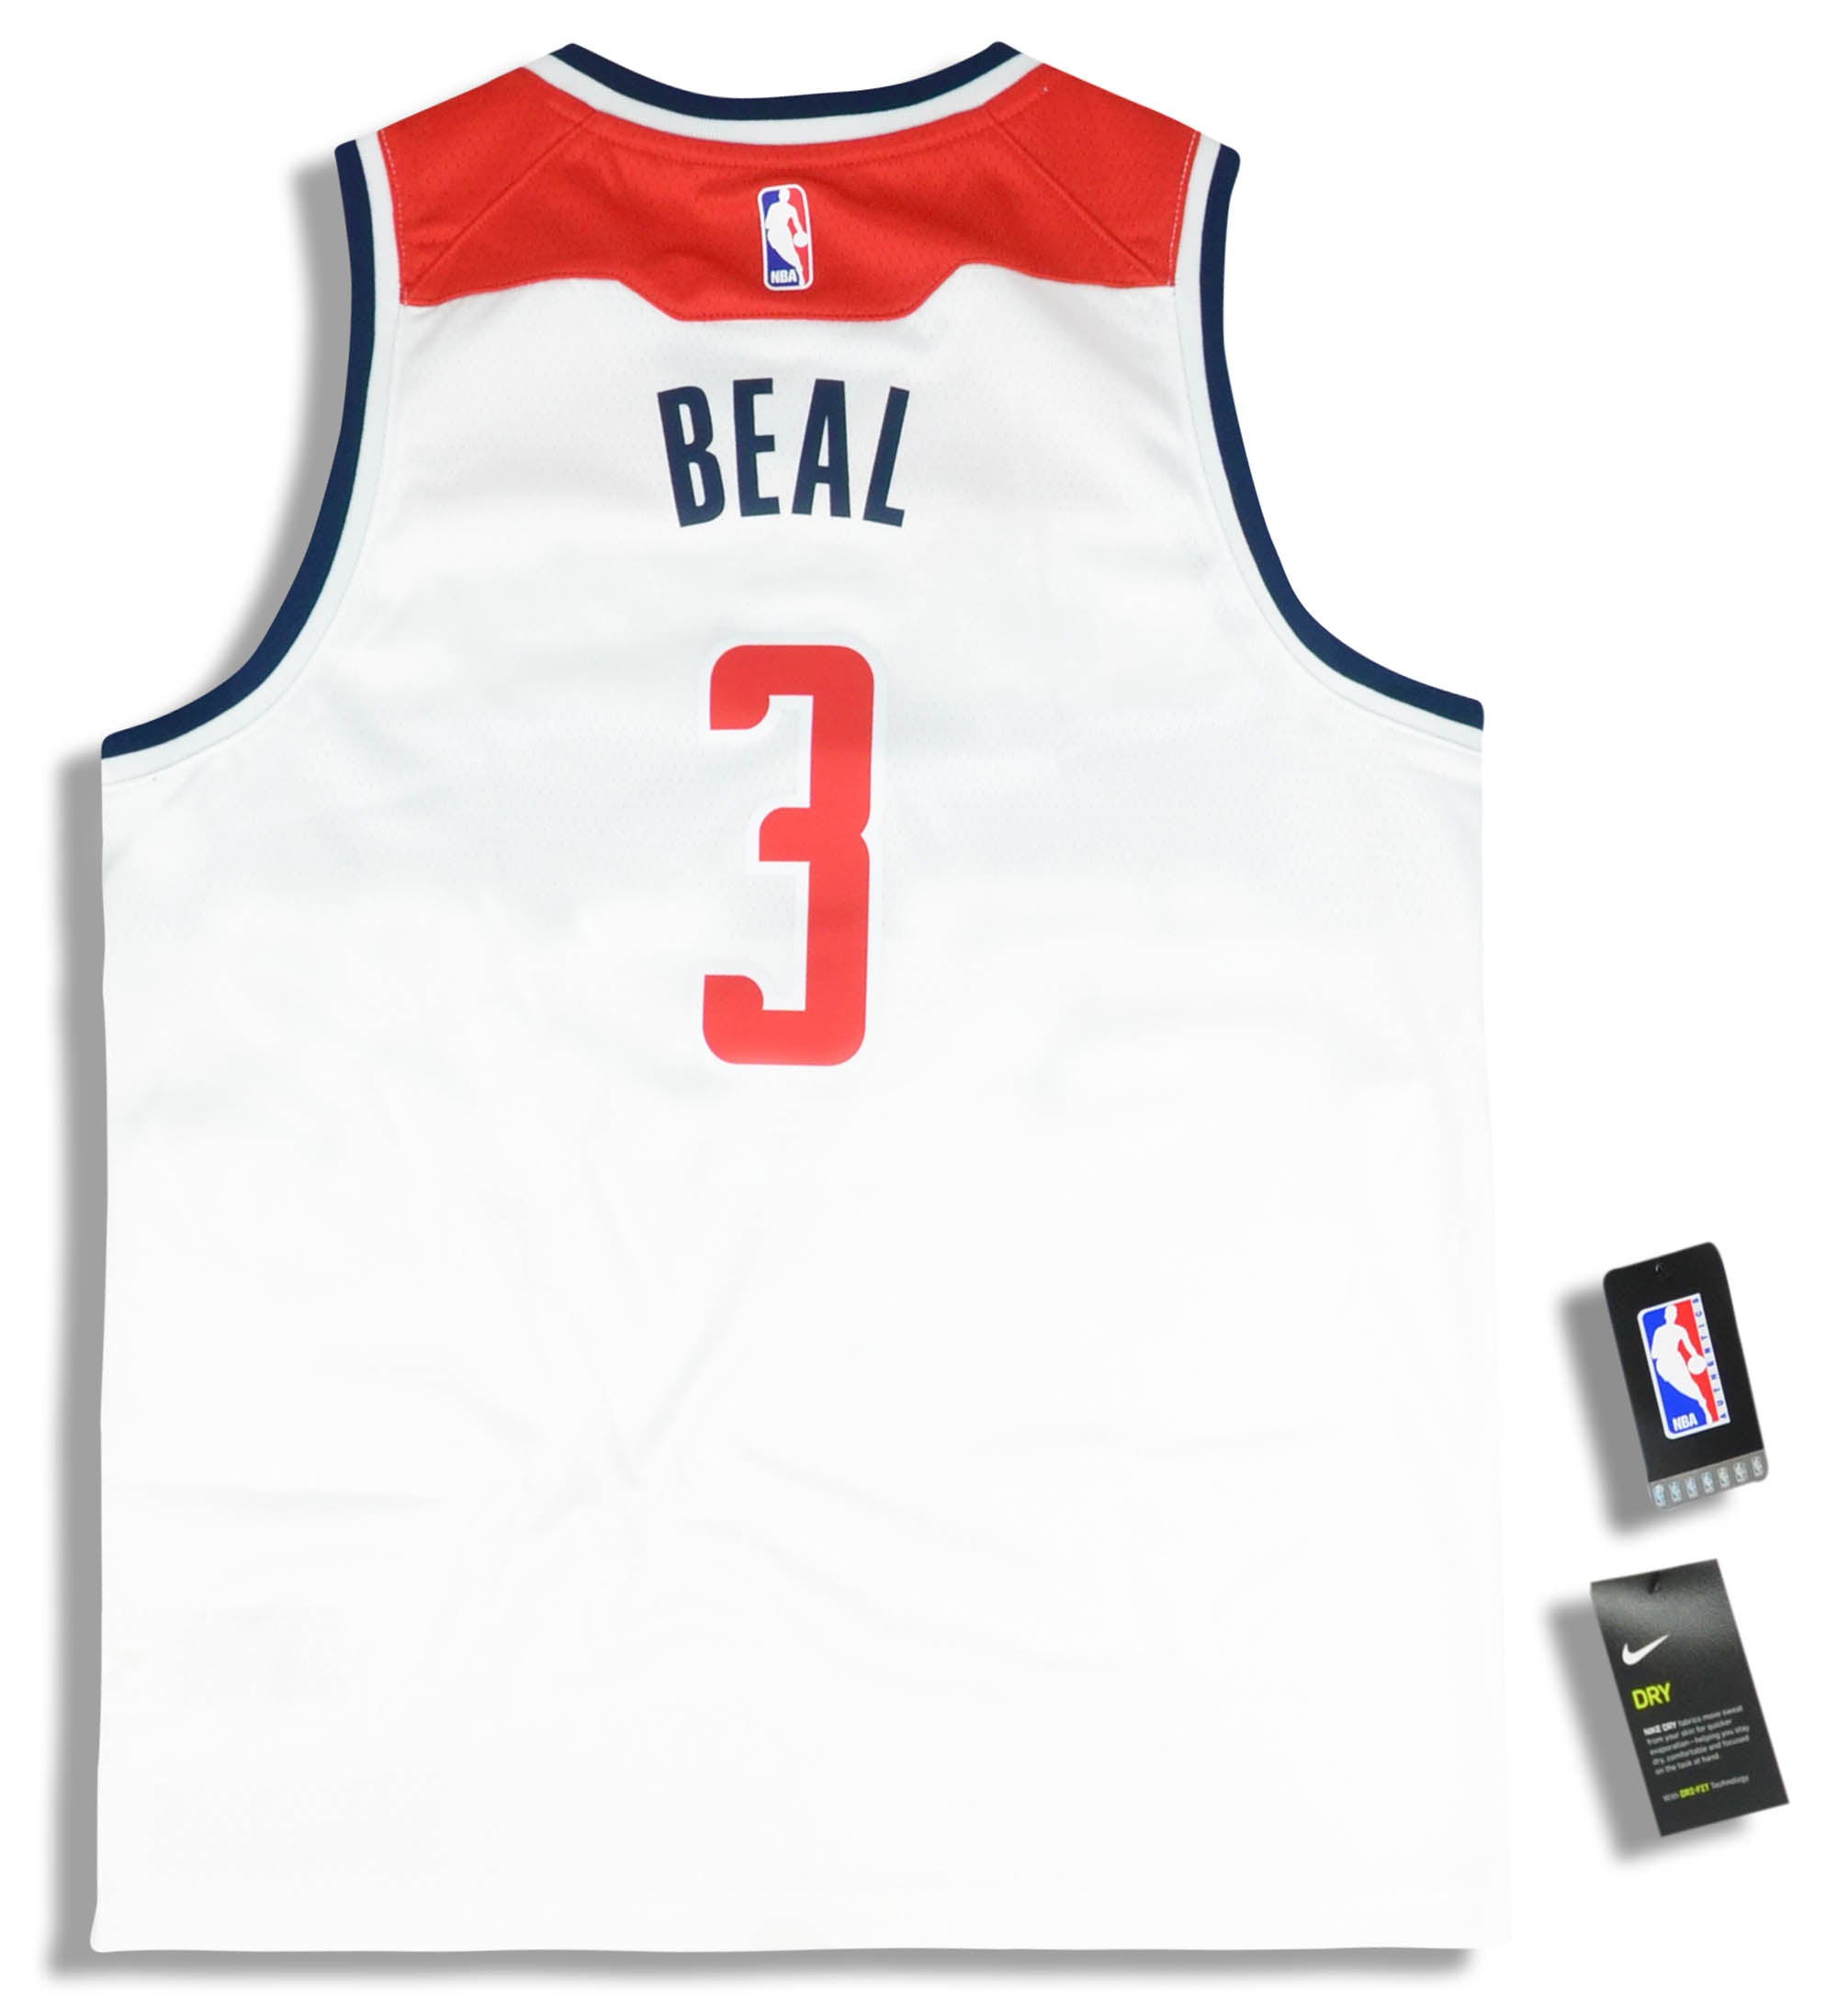 Wizards 2018-19 City Edition Jersey 